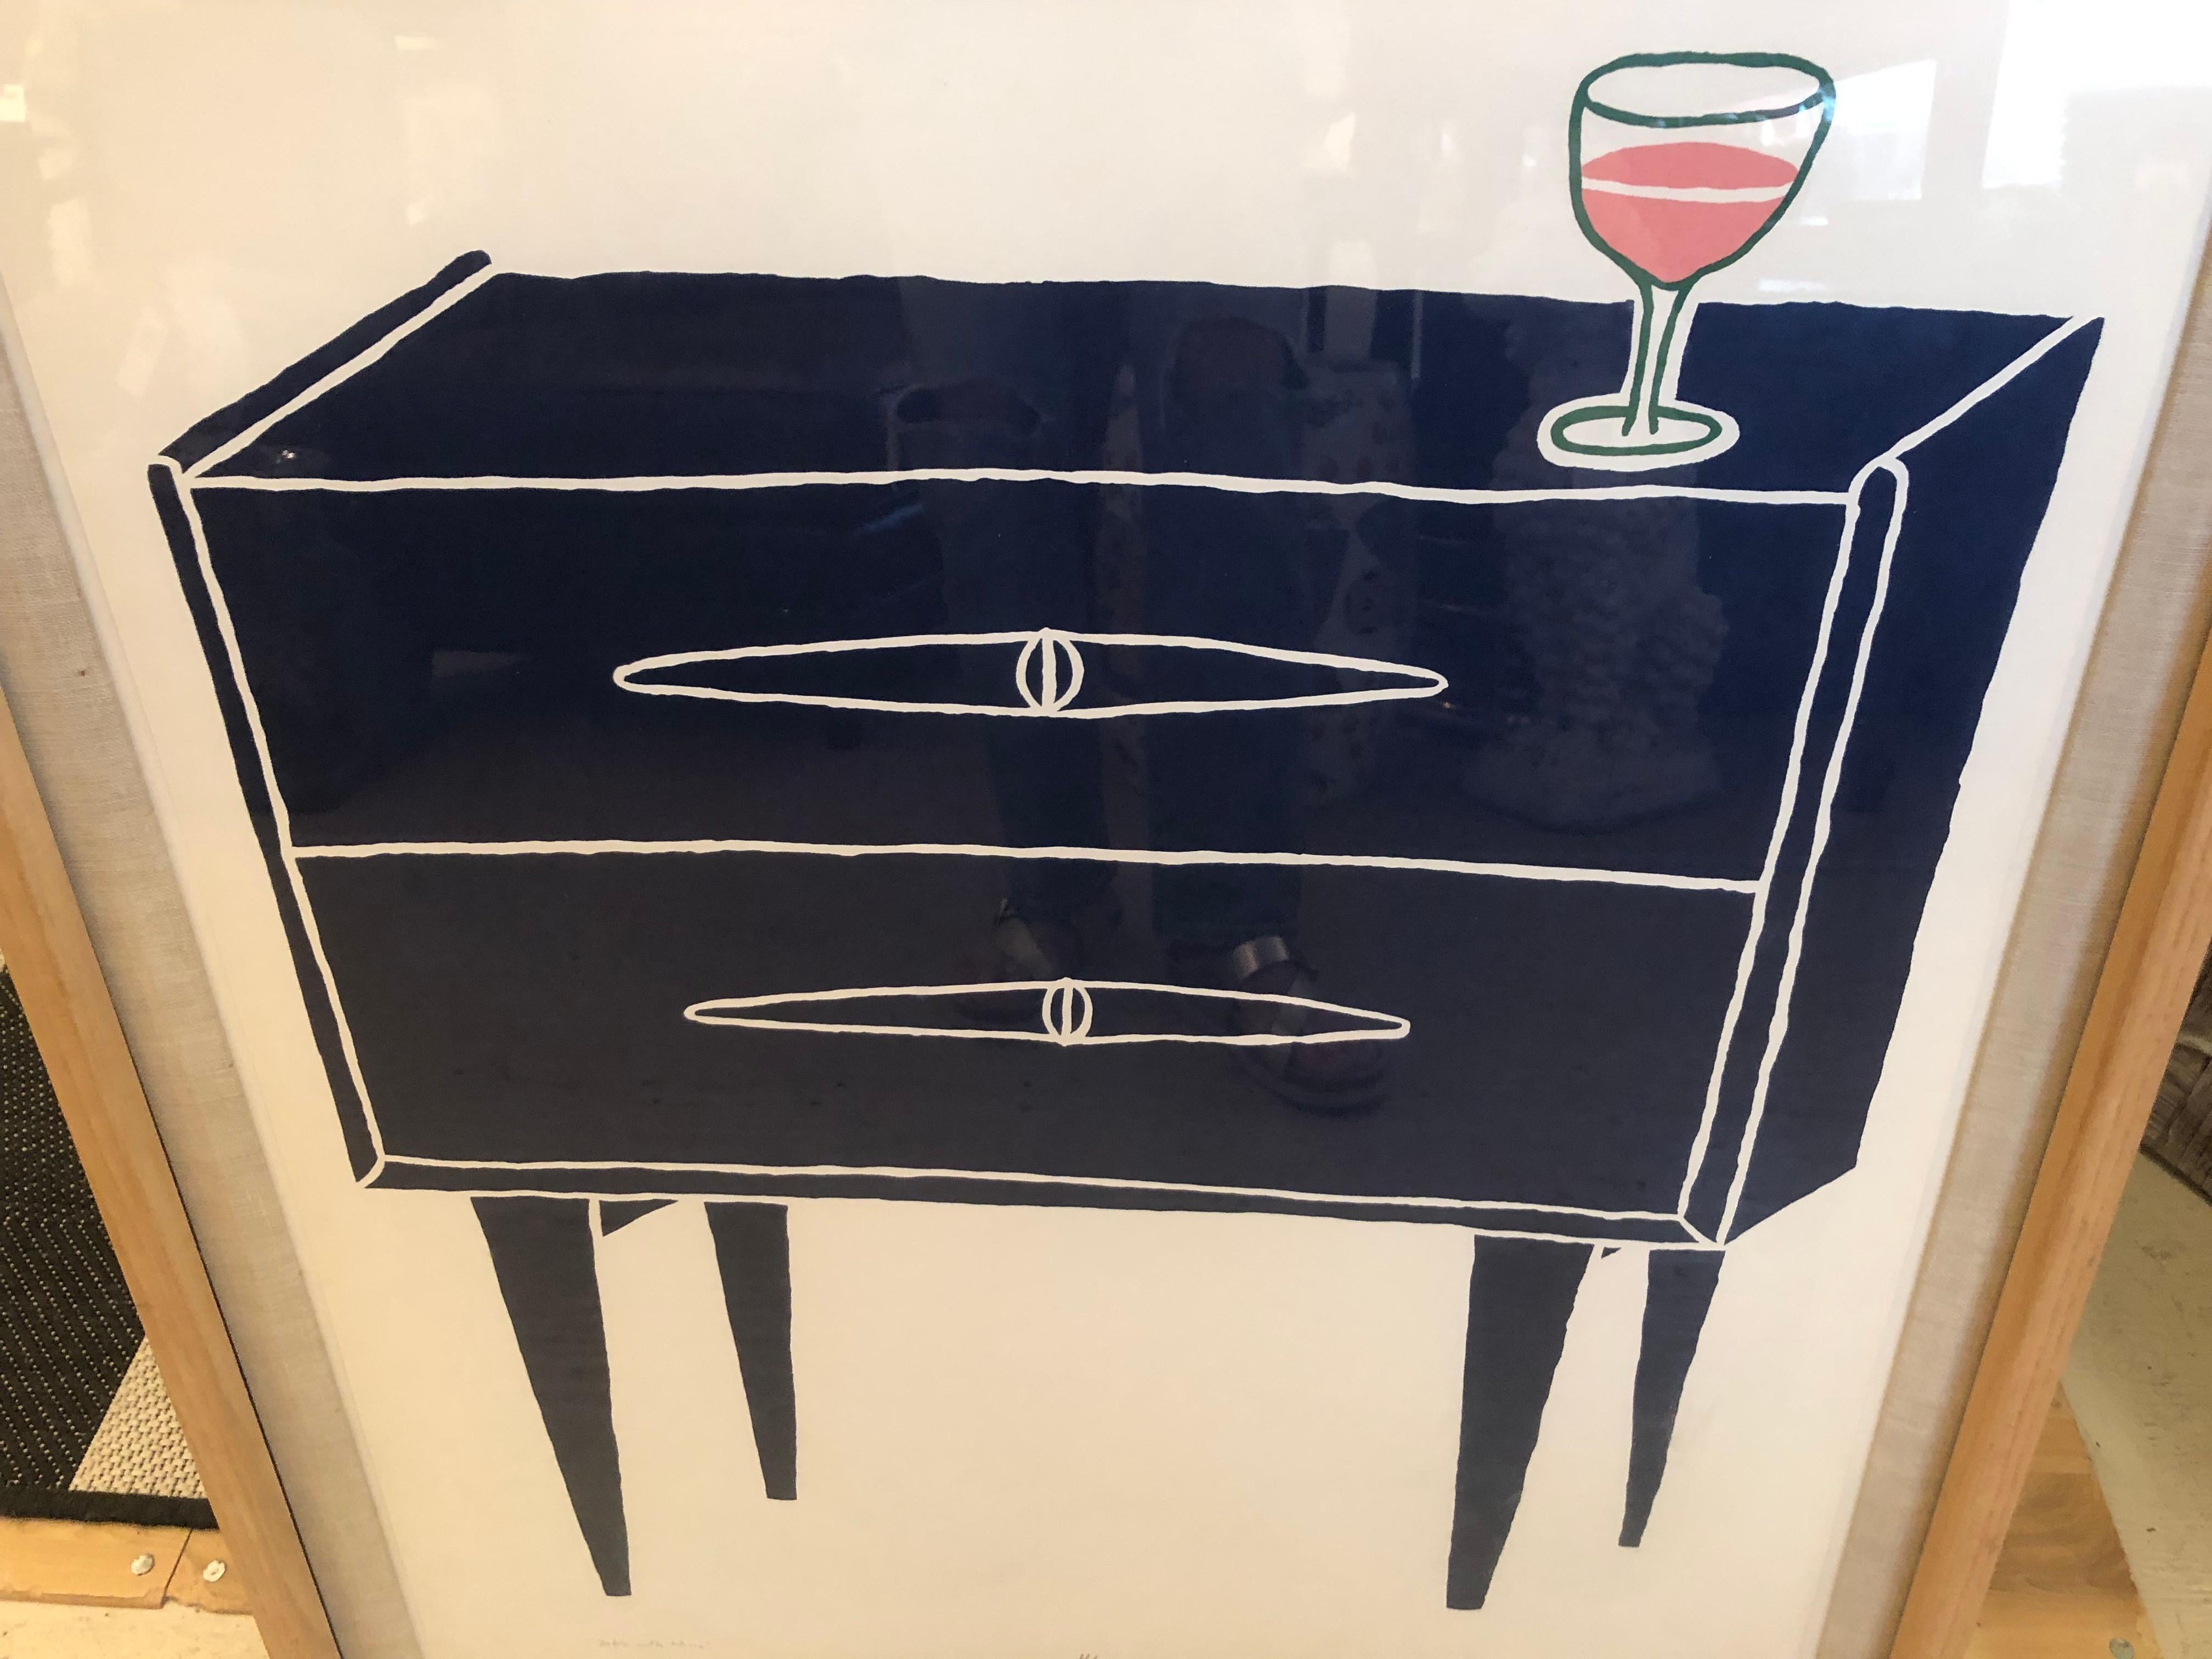 #9/12 and #4/12 limited edition signed silkscreen prints of a navy blue night stand, one with orange glass of wine on top;  the other an orange ashtray.  Makes a fun and bold pair of pop art by NJ artist Paul Giancola.